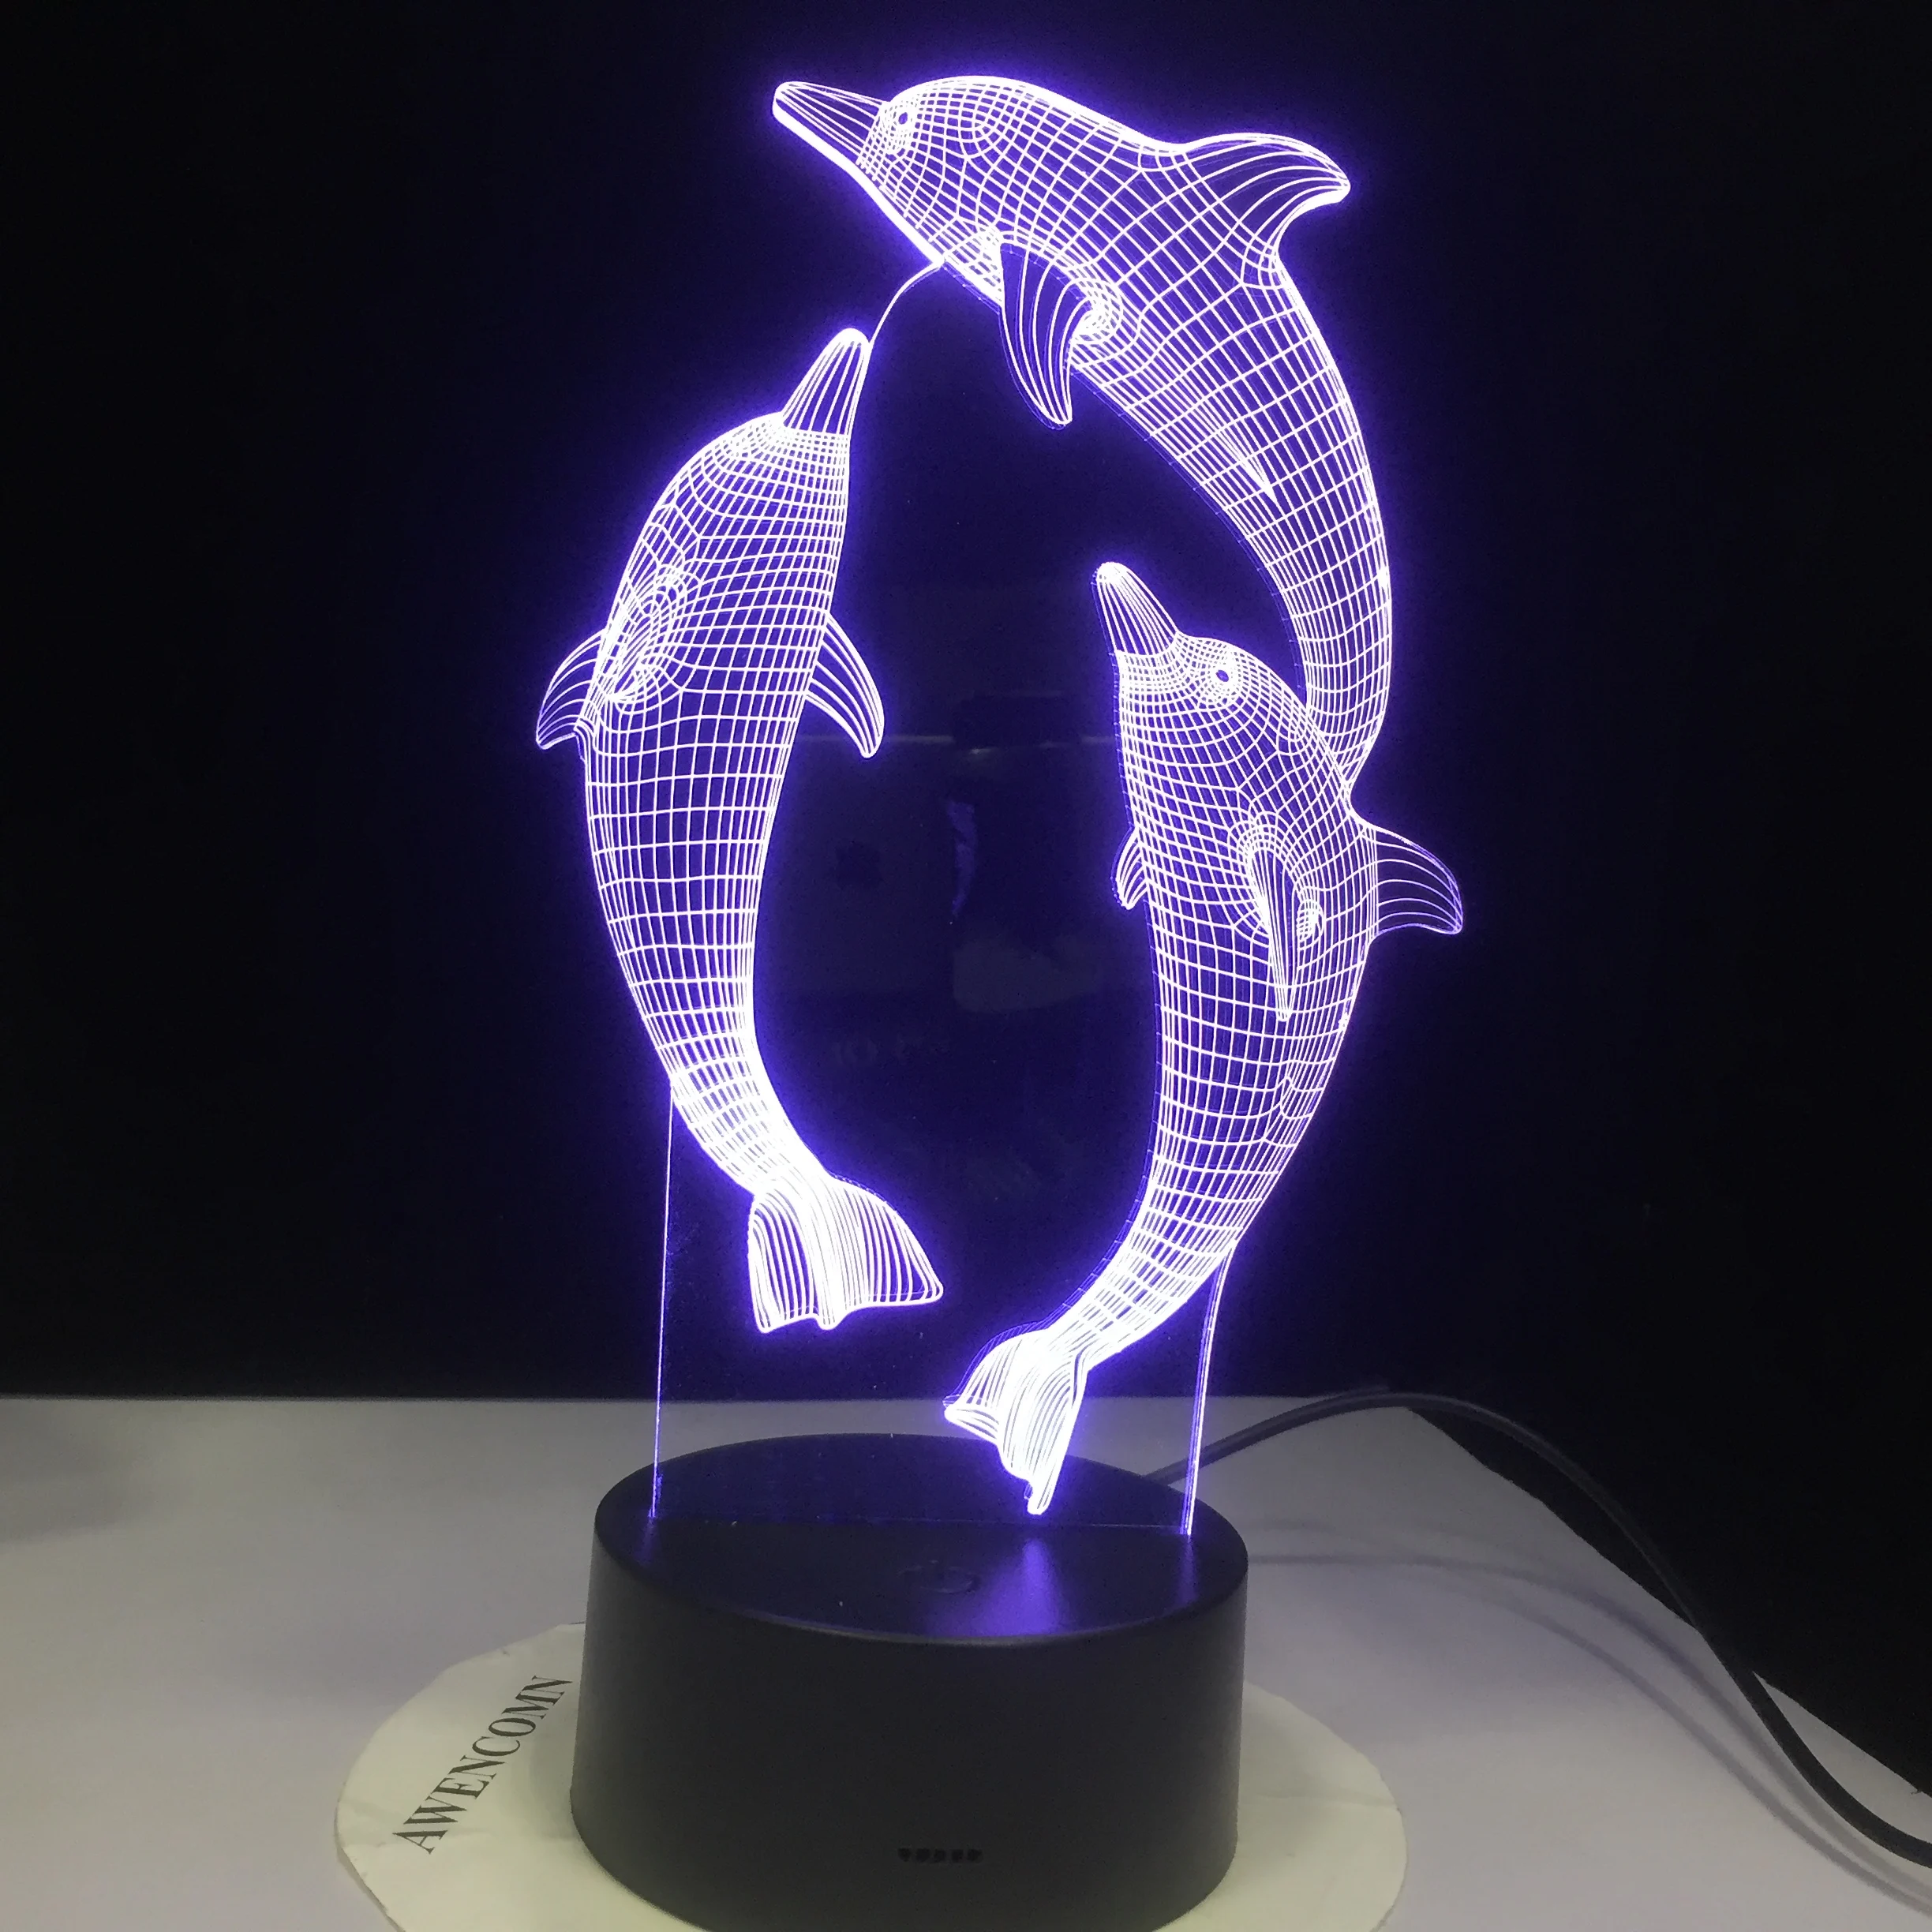 Details about   3D Illusion Lamp Kangaroo Shape Colorful Acrylic Lamp Touch Button Night Light 